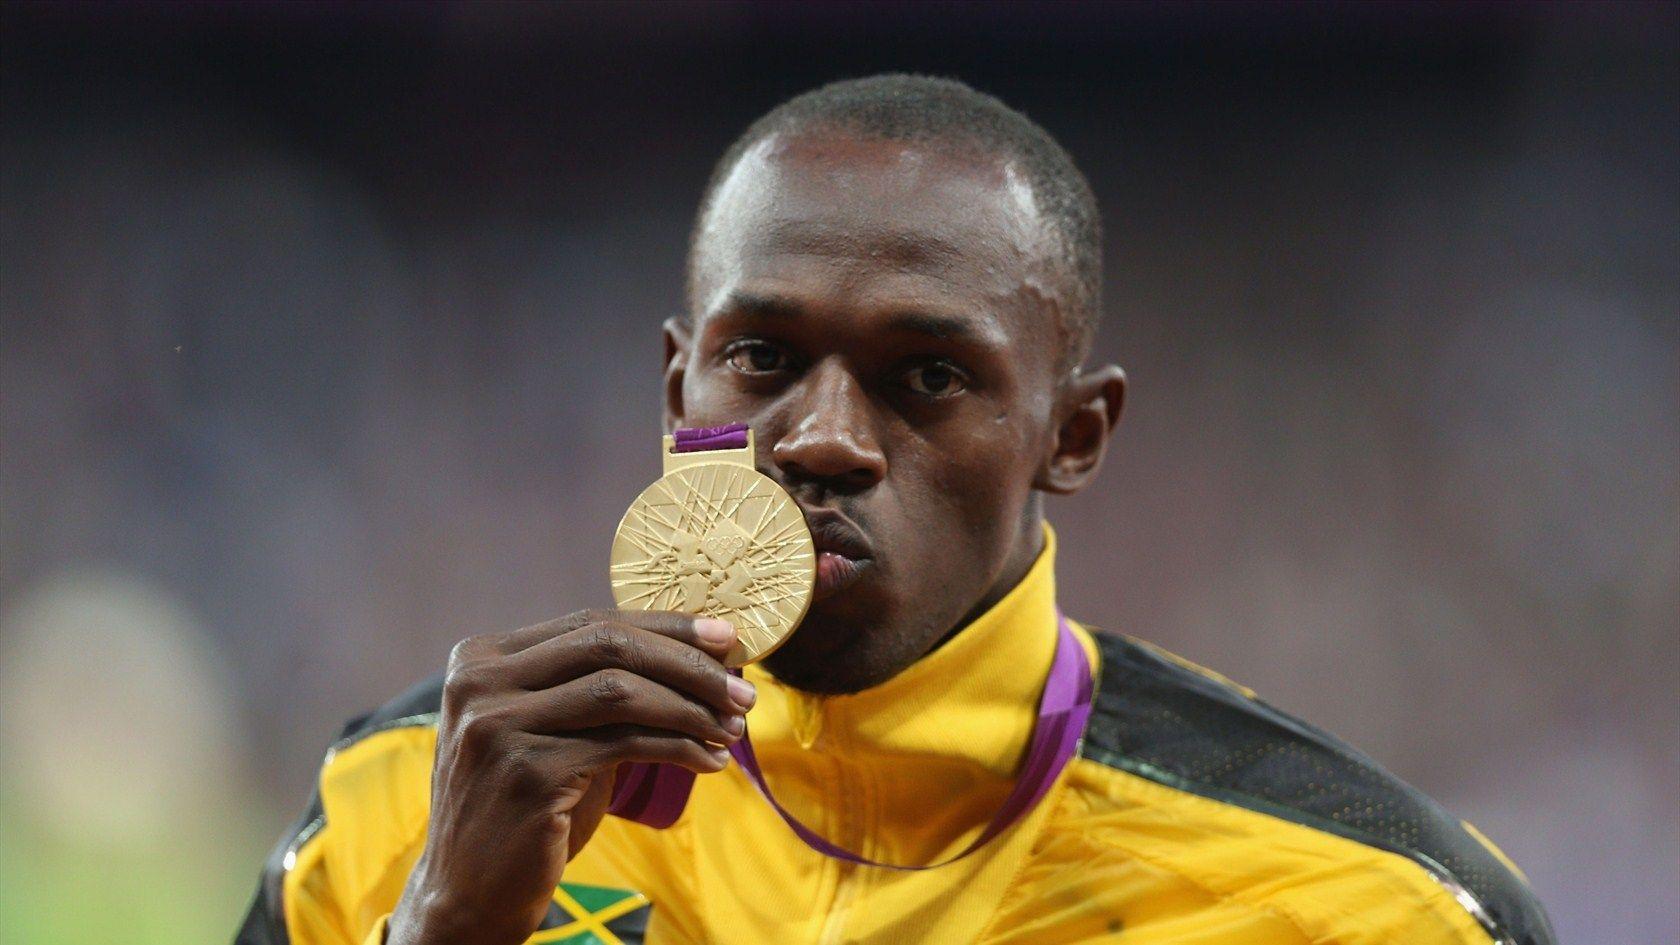 Usain Bolt Atletic Wallpapers